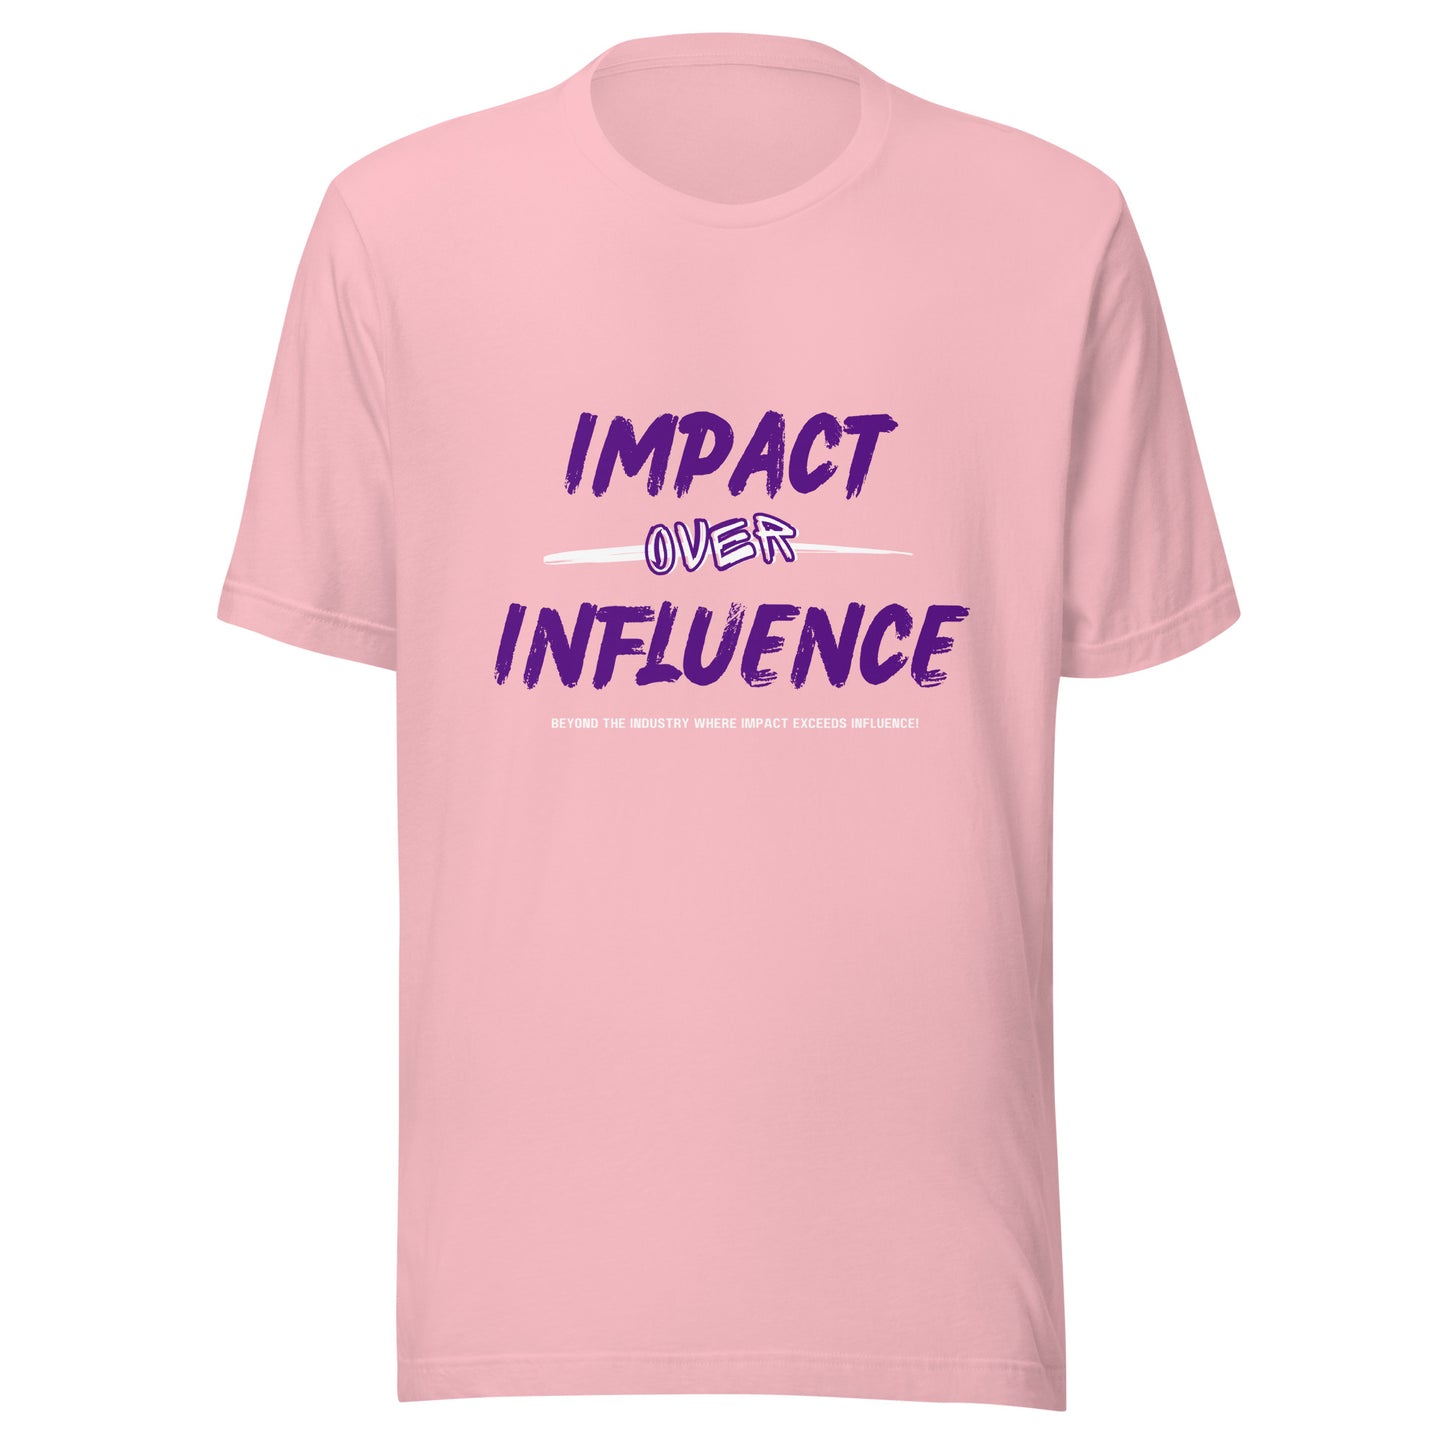 IMPACT OVER INFLUENCE (PURPLE TEXT)